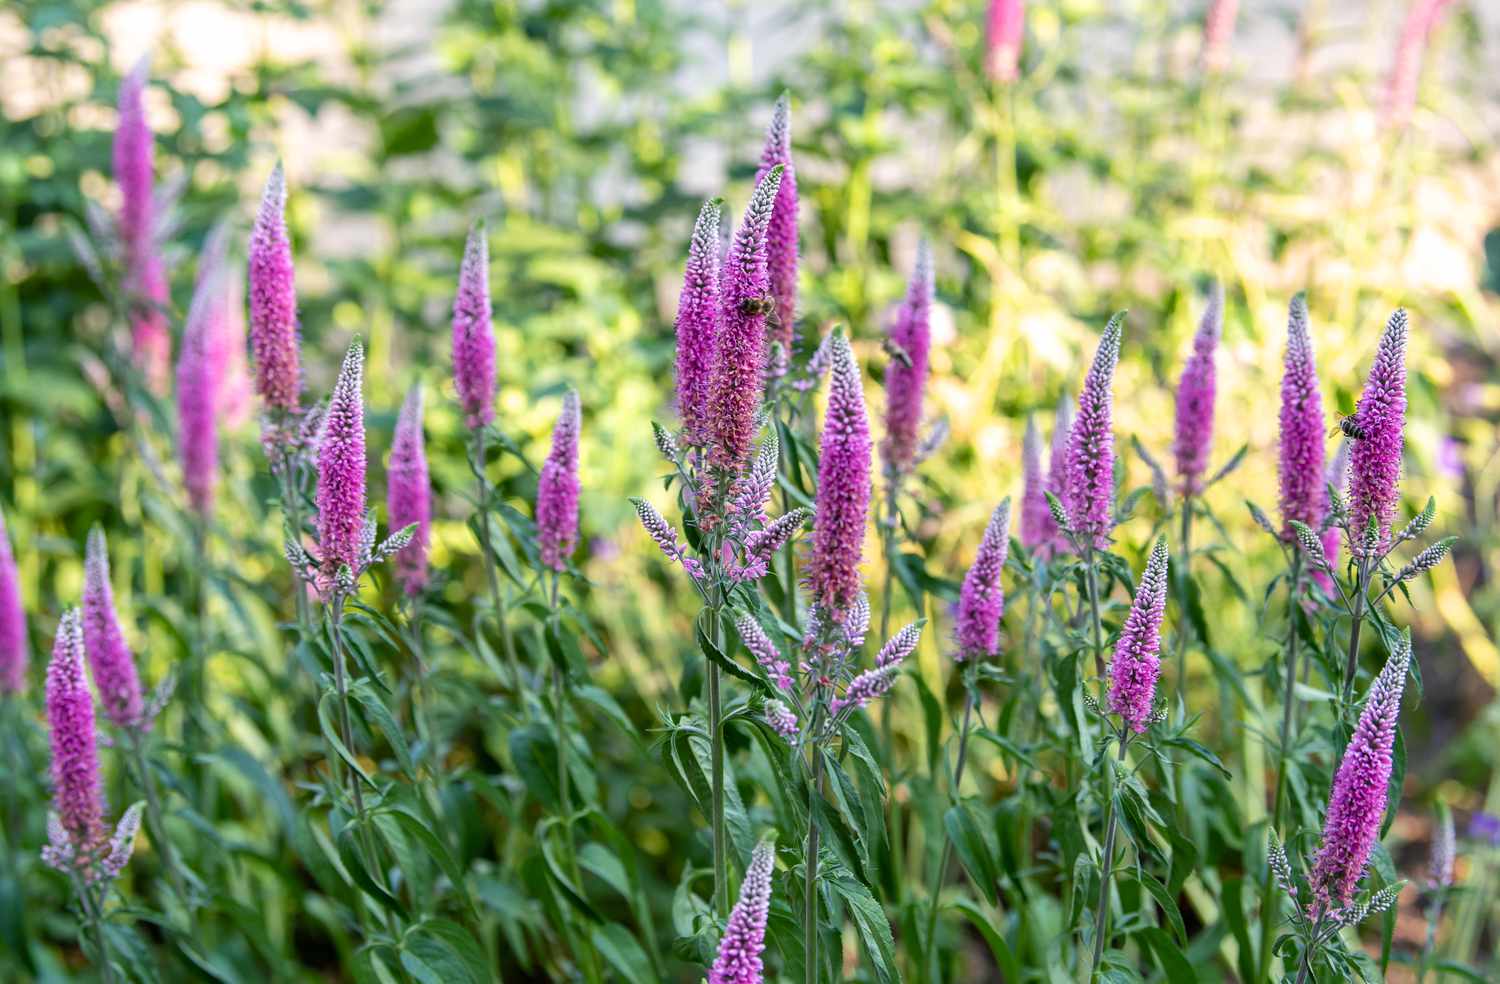 Veronica plant with pink and white flower spikes on thin stems